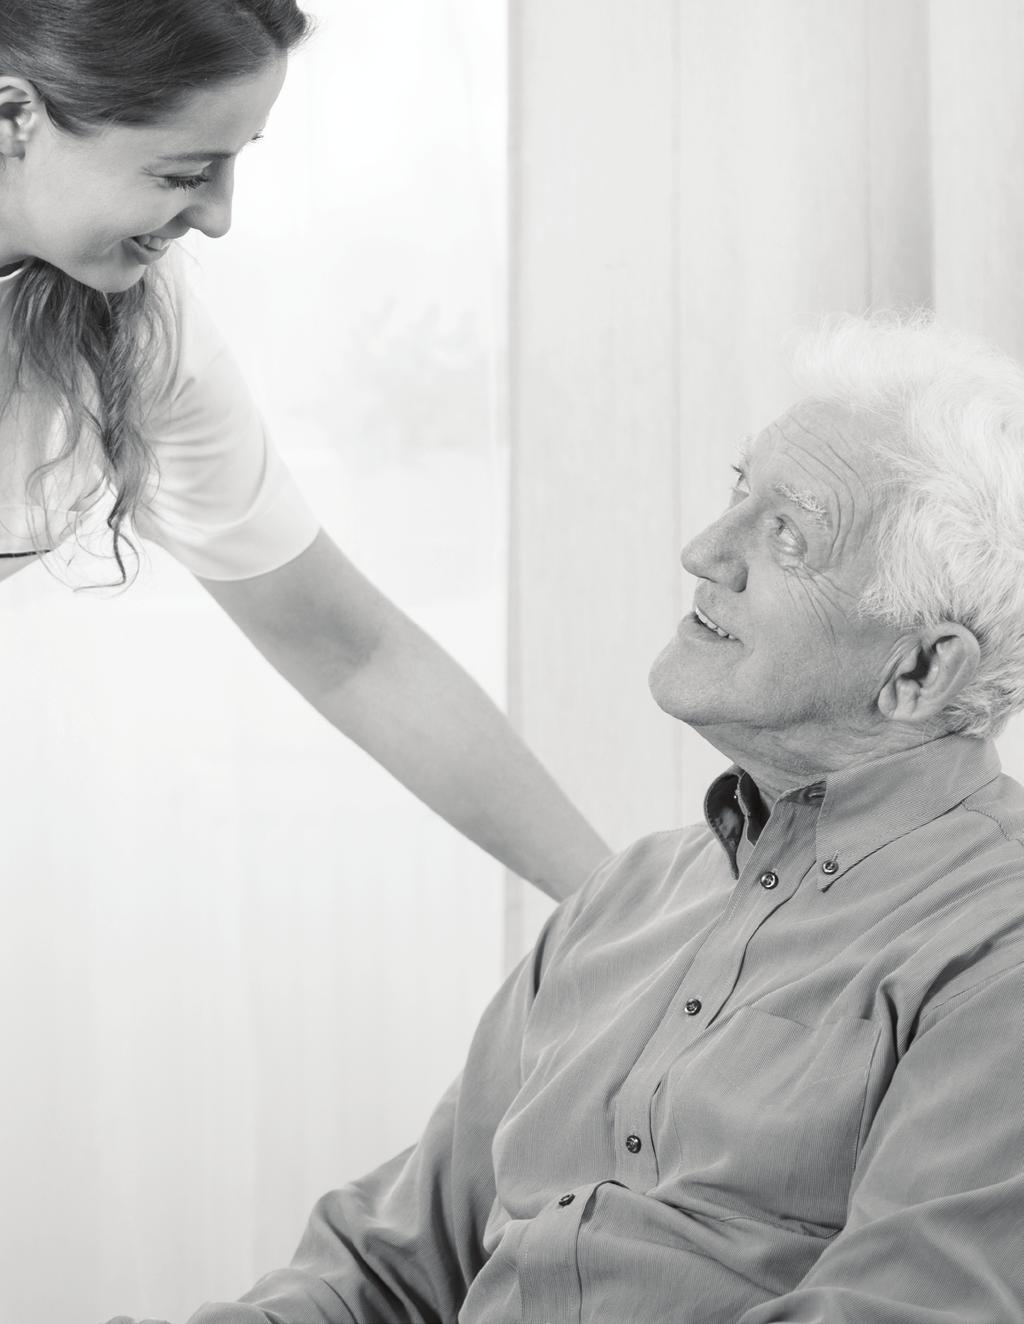 LONG-TERM CARE IS MORE THAN A NURSING HOME Long-term care (LTC) encompasses a variety of services that include the need for both medical and non-medical assistance.